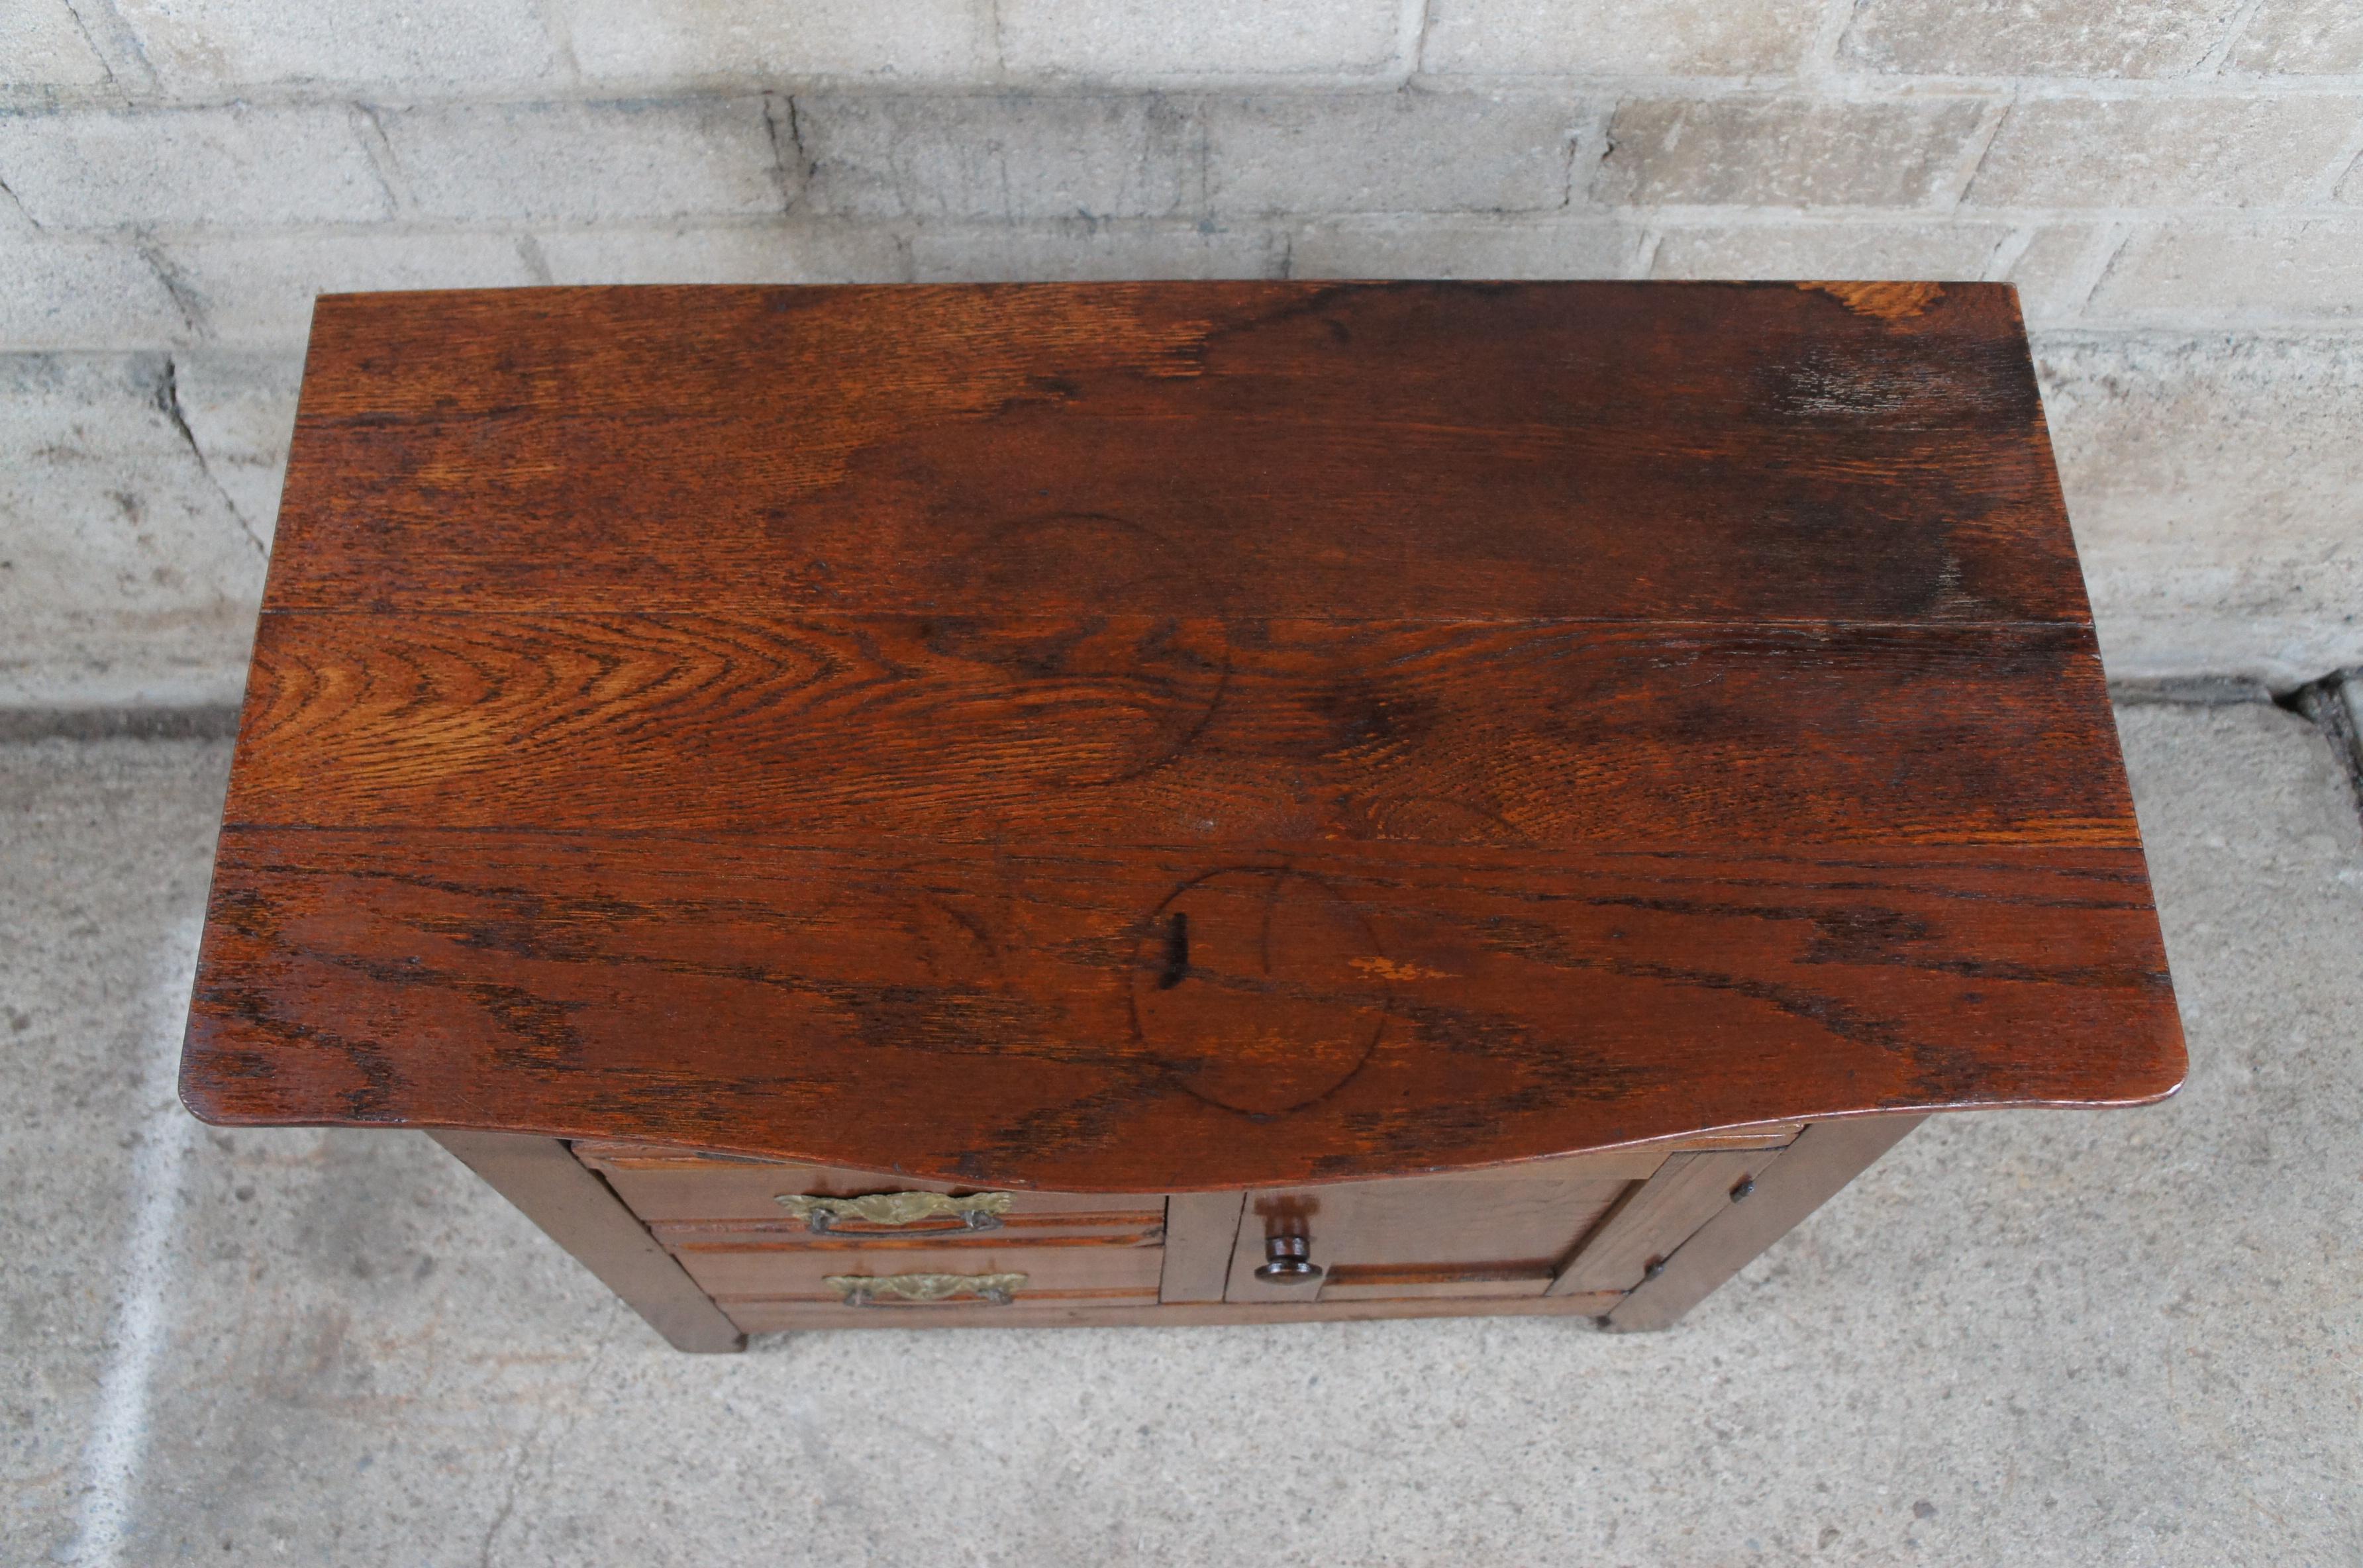 Antique Late Victorian Oak Washstand Cabinet Chest Dresser Nightstand Table In Fair Condition For Sale In Dayton, OH